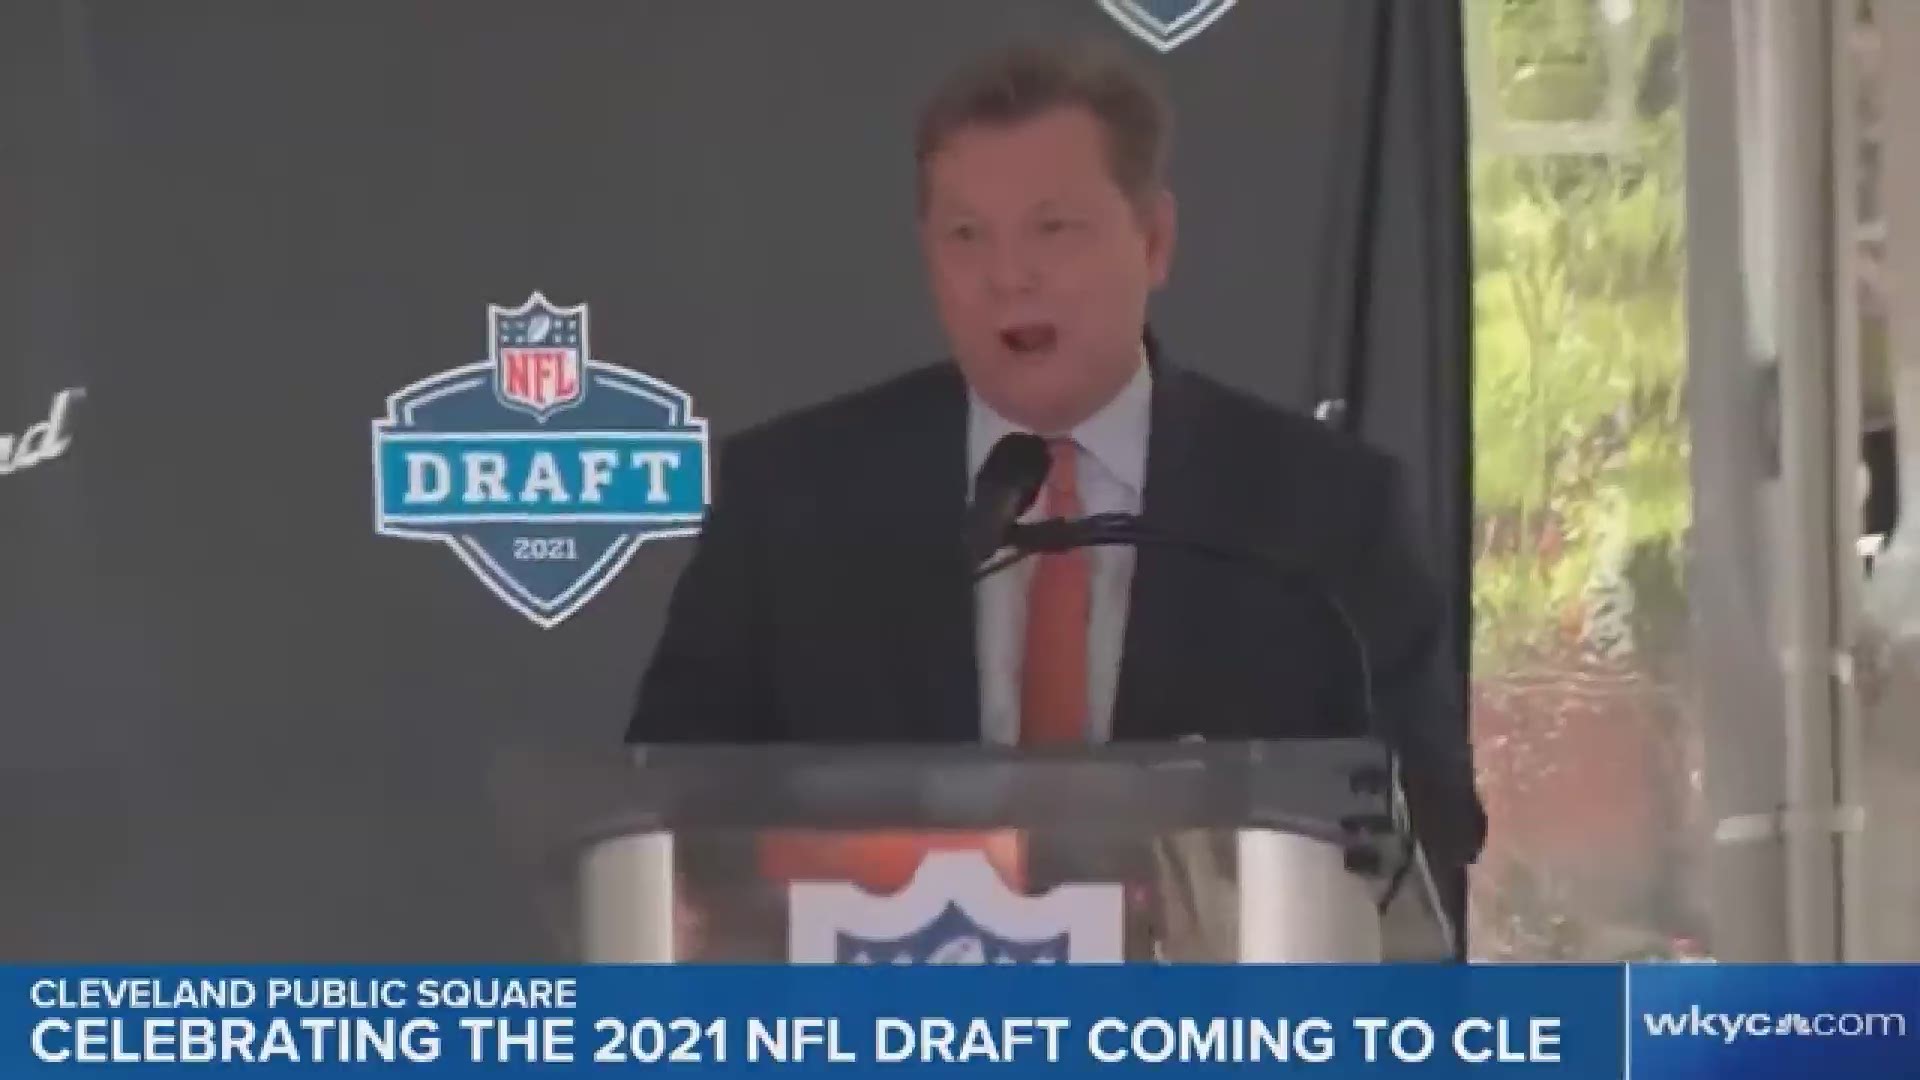 On Thursday, the Browns celebrated the city of Cleveland being awarded the 2021 NFL Draft.